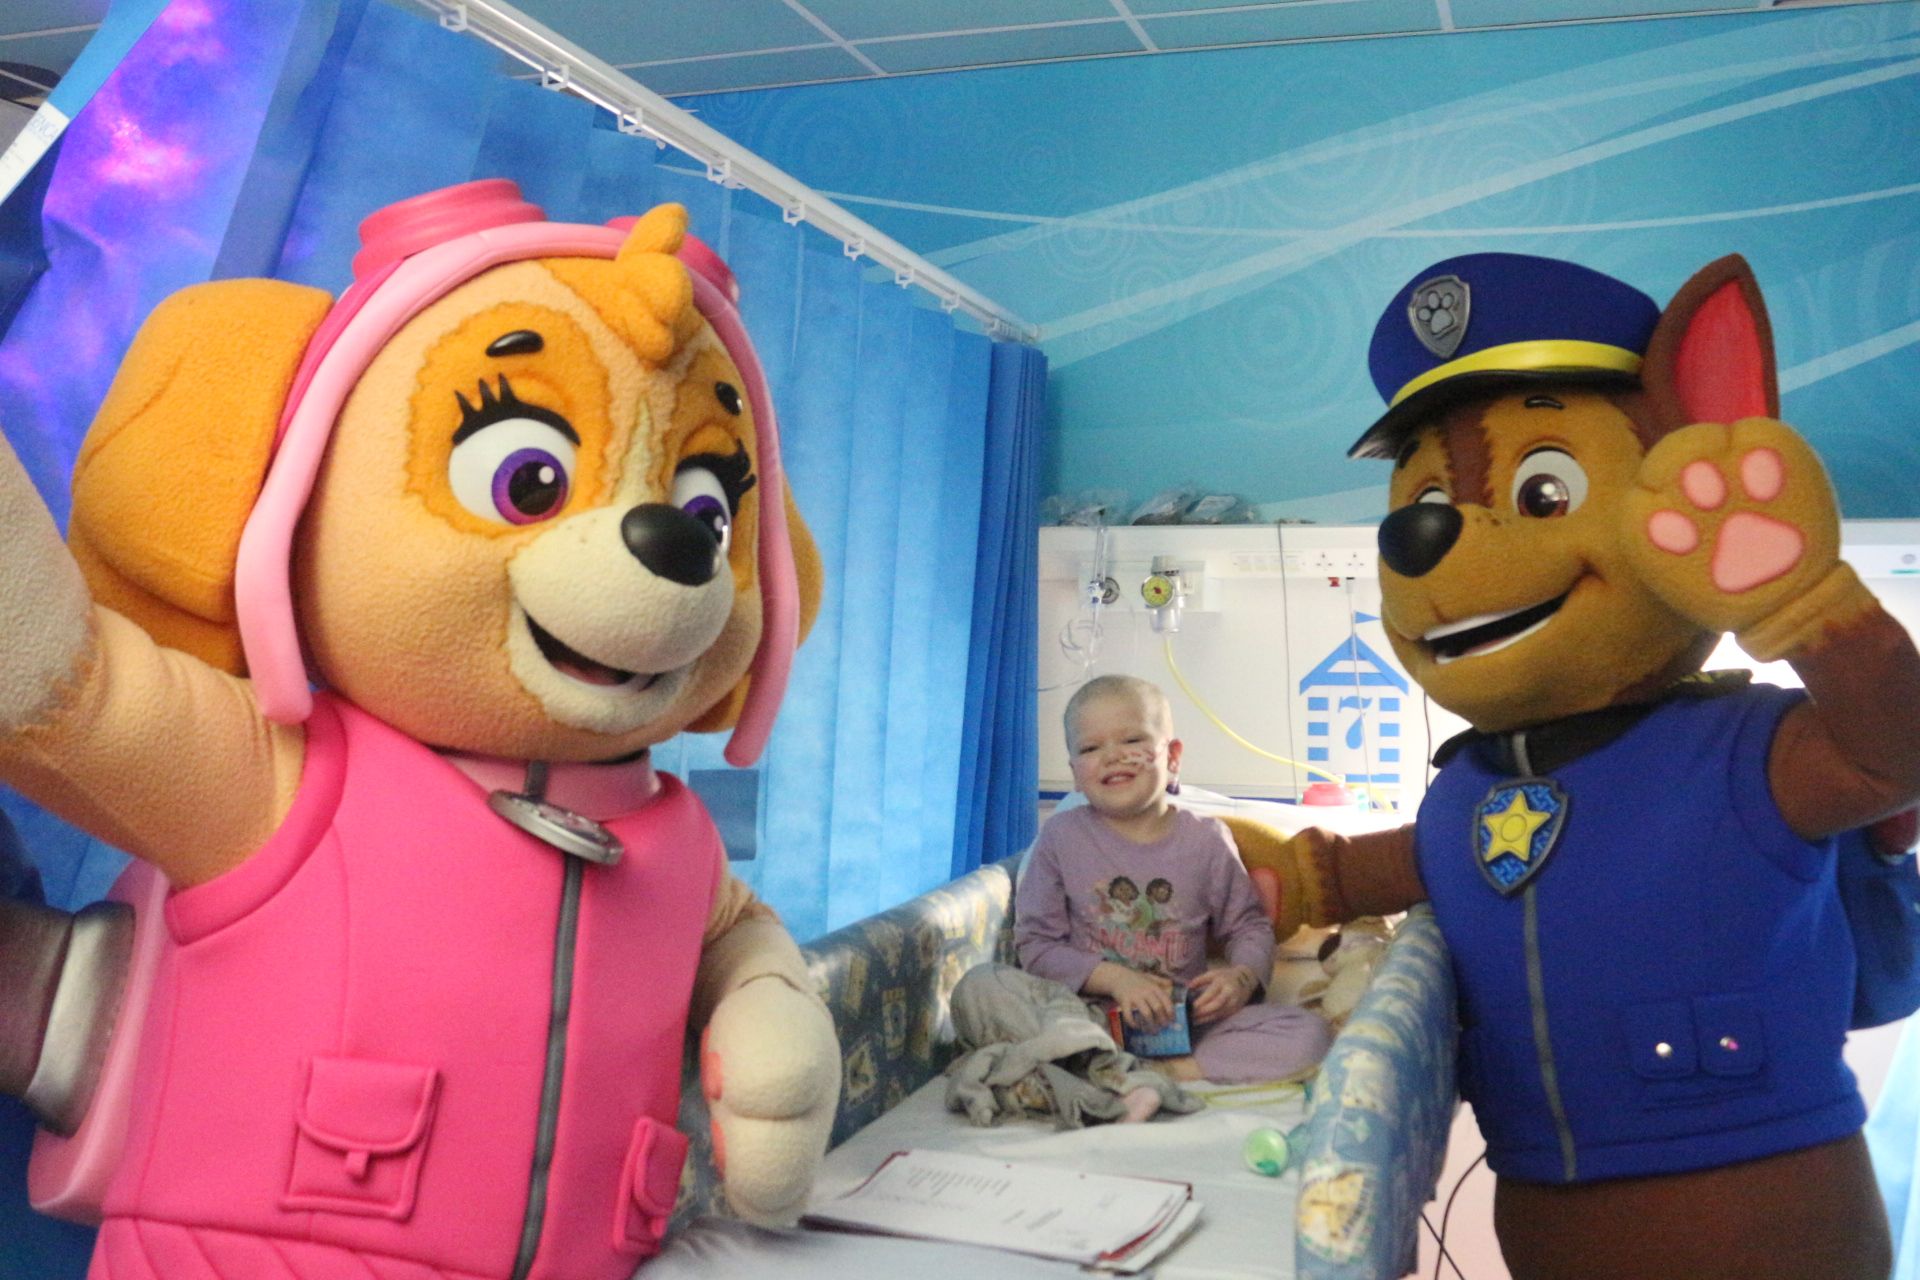 The Entertainer with Childrens hospital